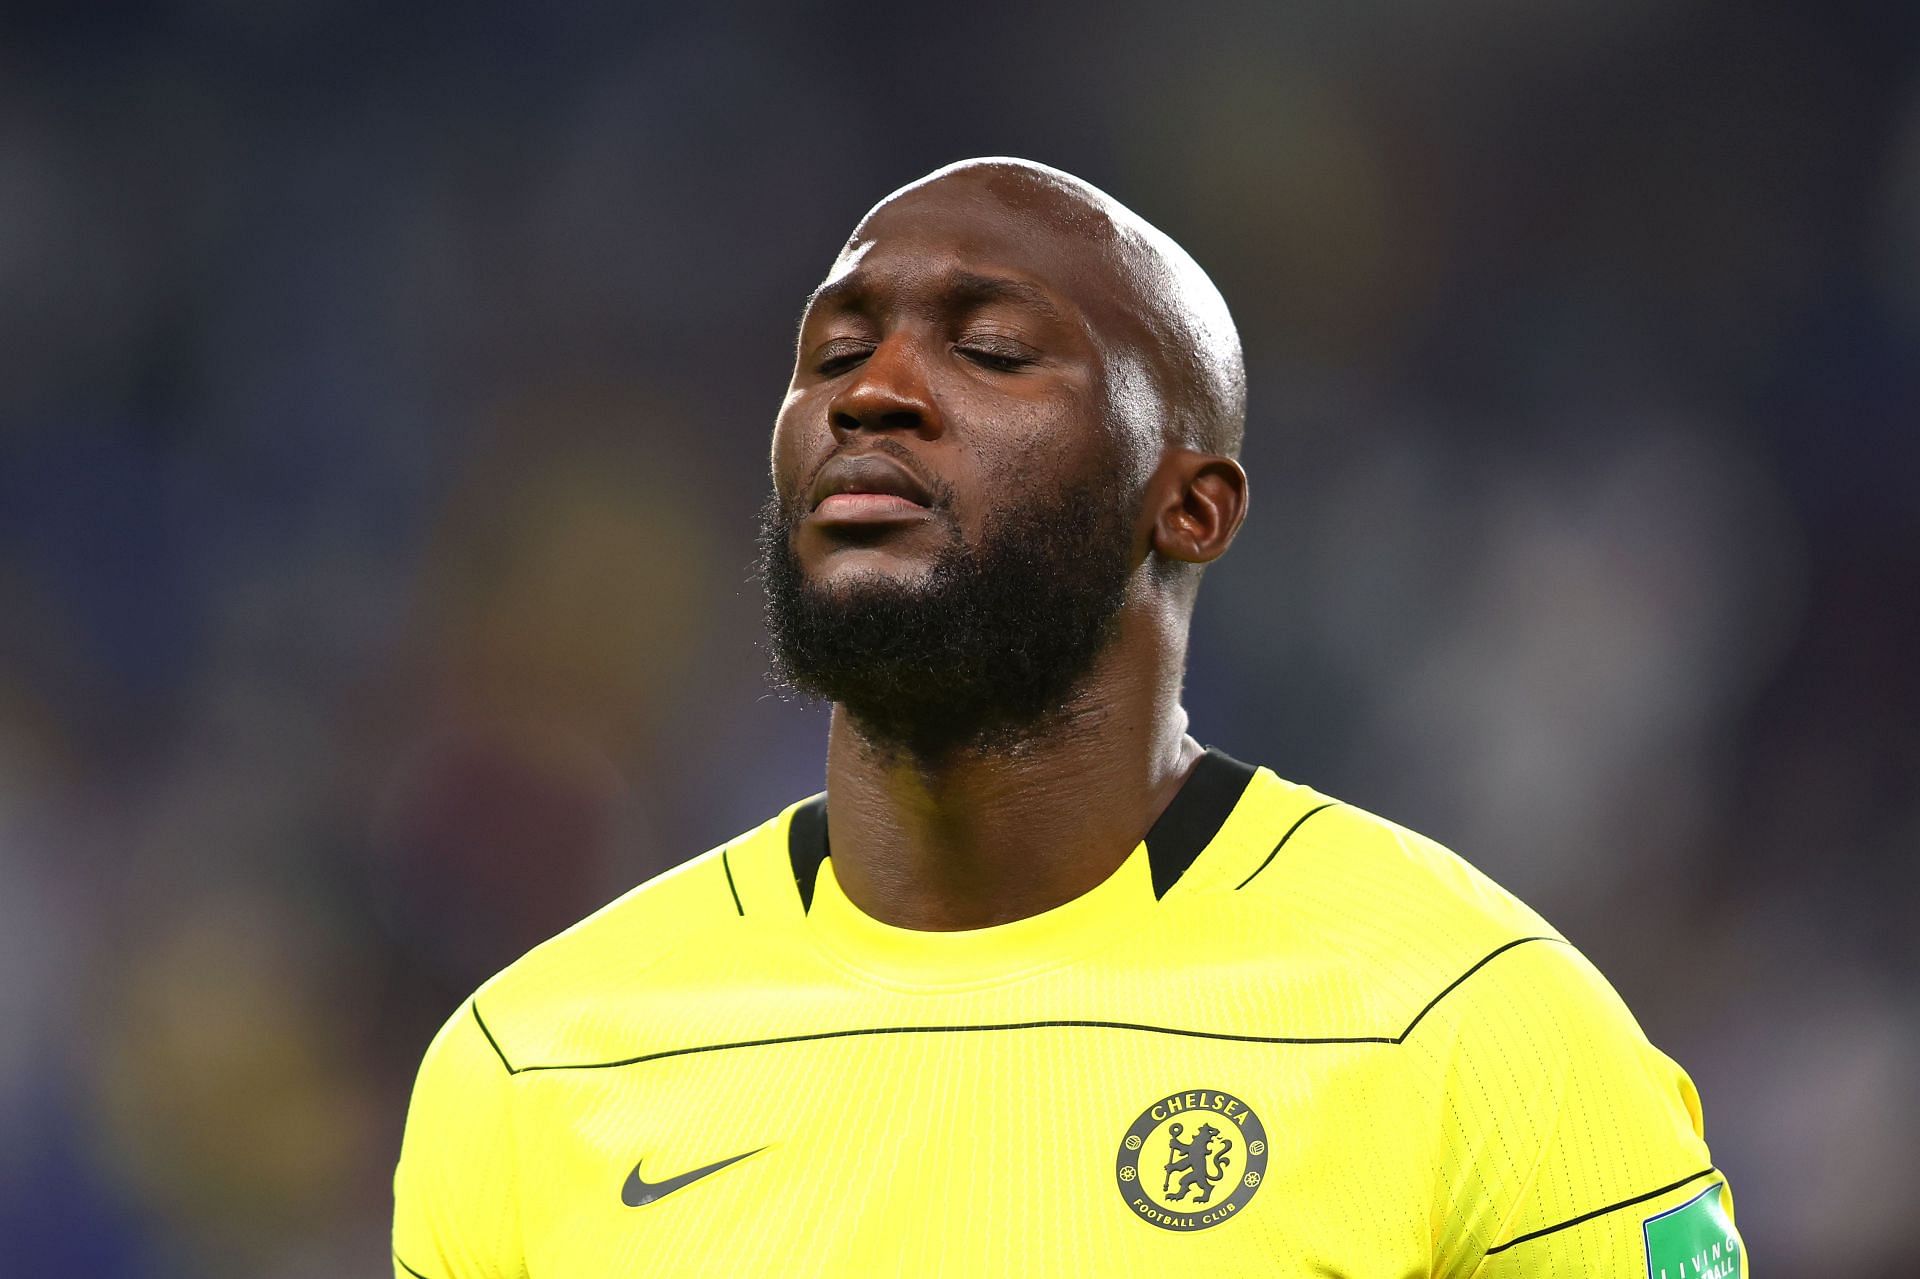 Lukaku has been a huge disappointment for Chelsea